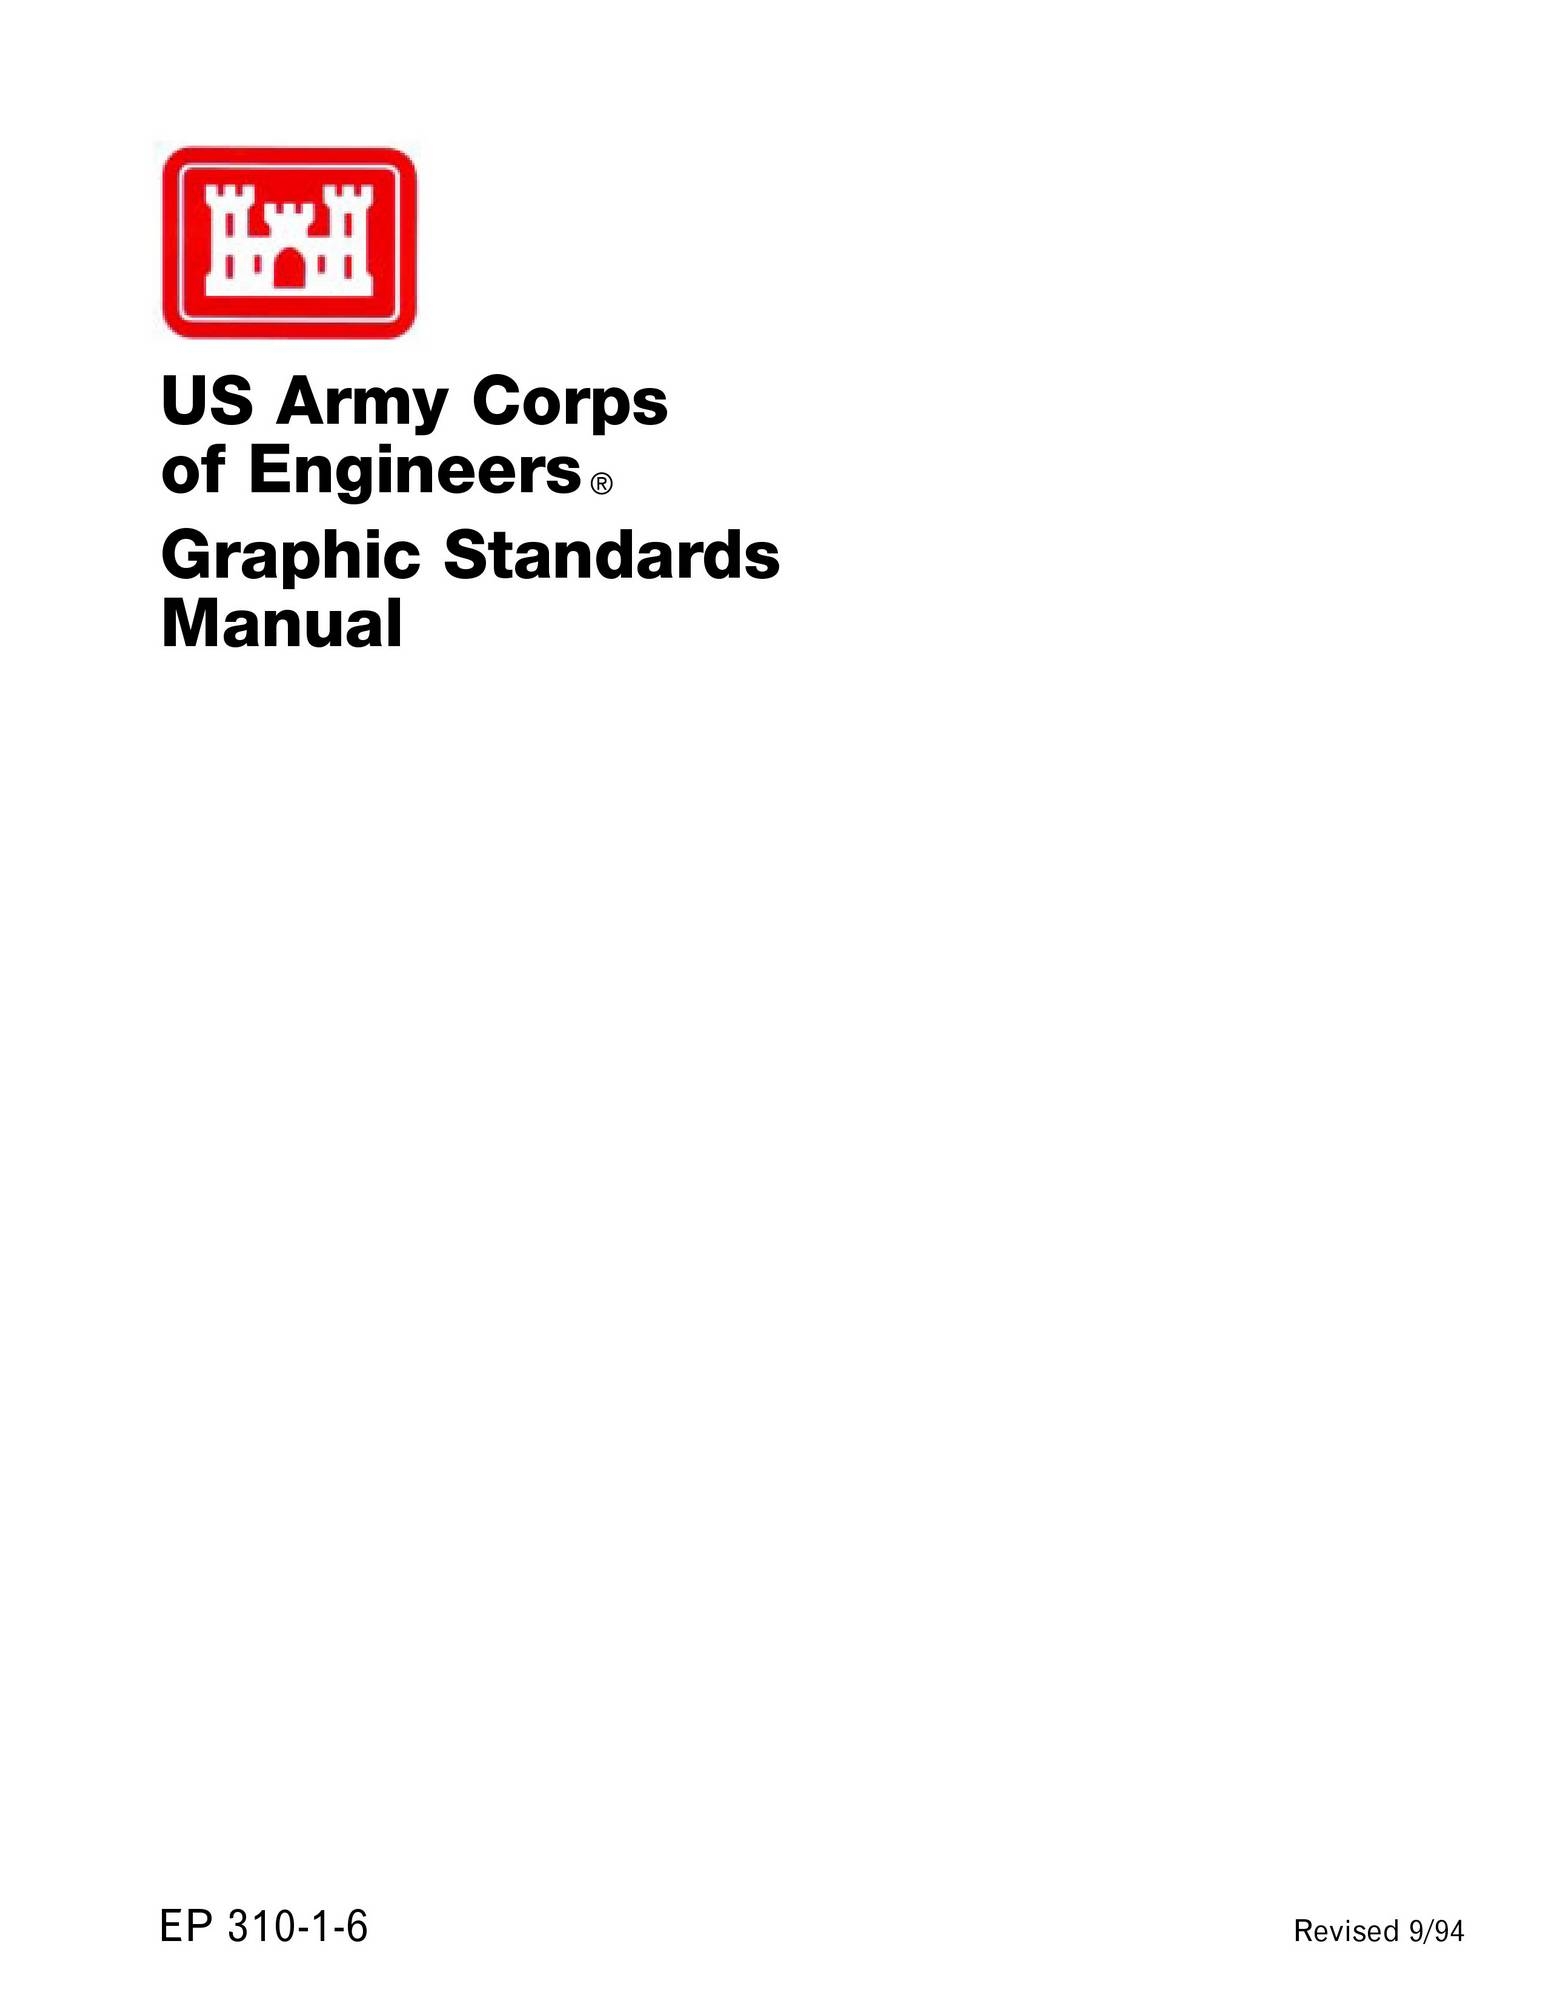 US Army Corps of Engineers Graphic Standards Manual